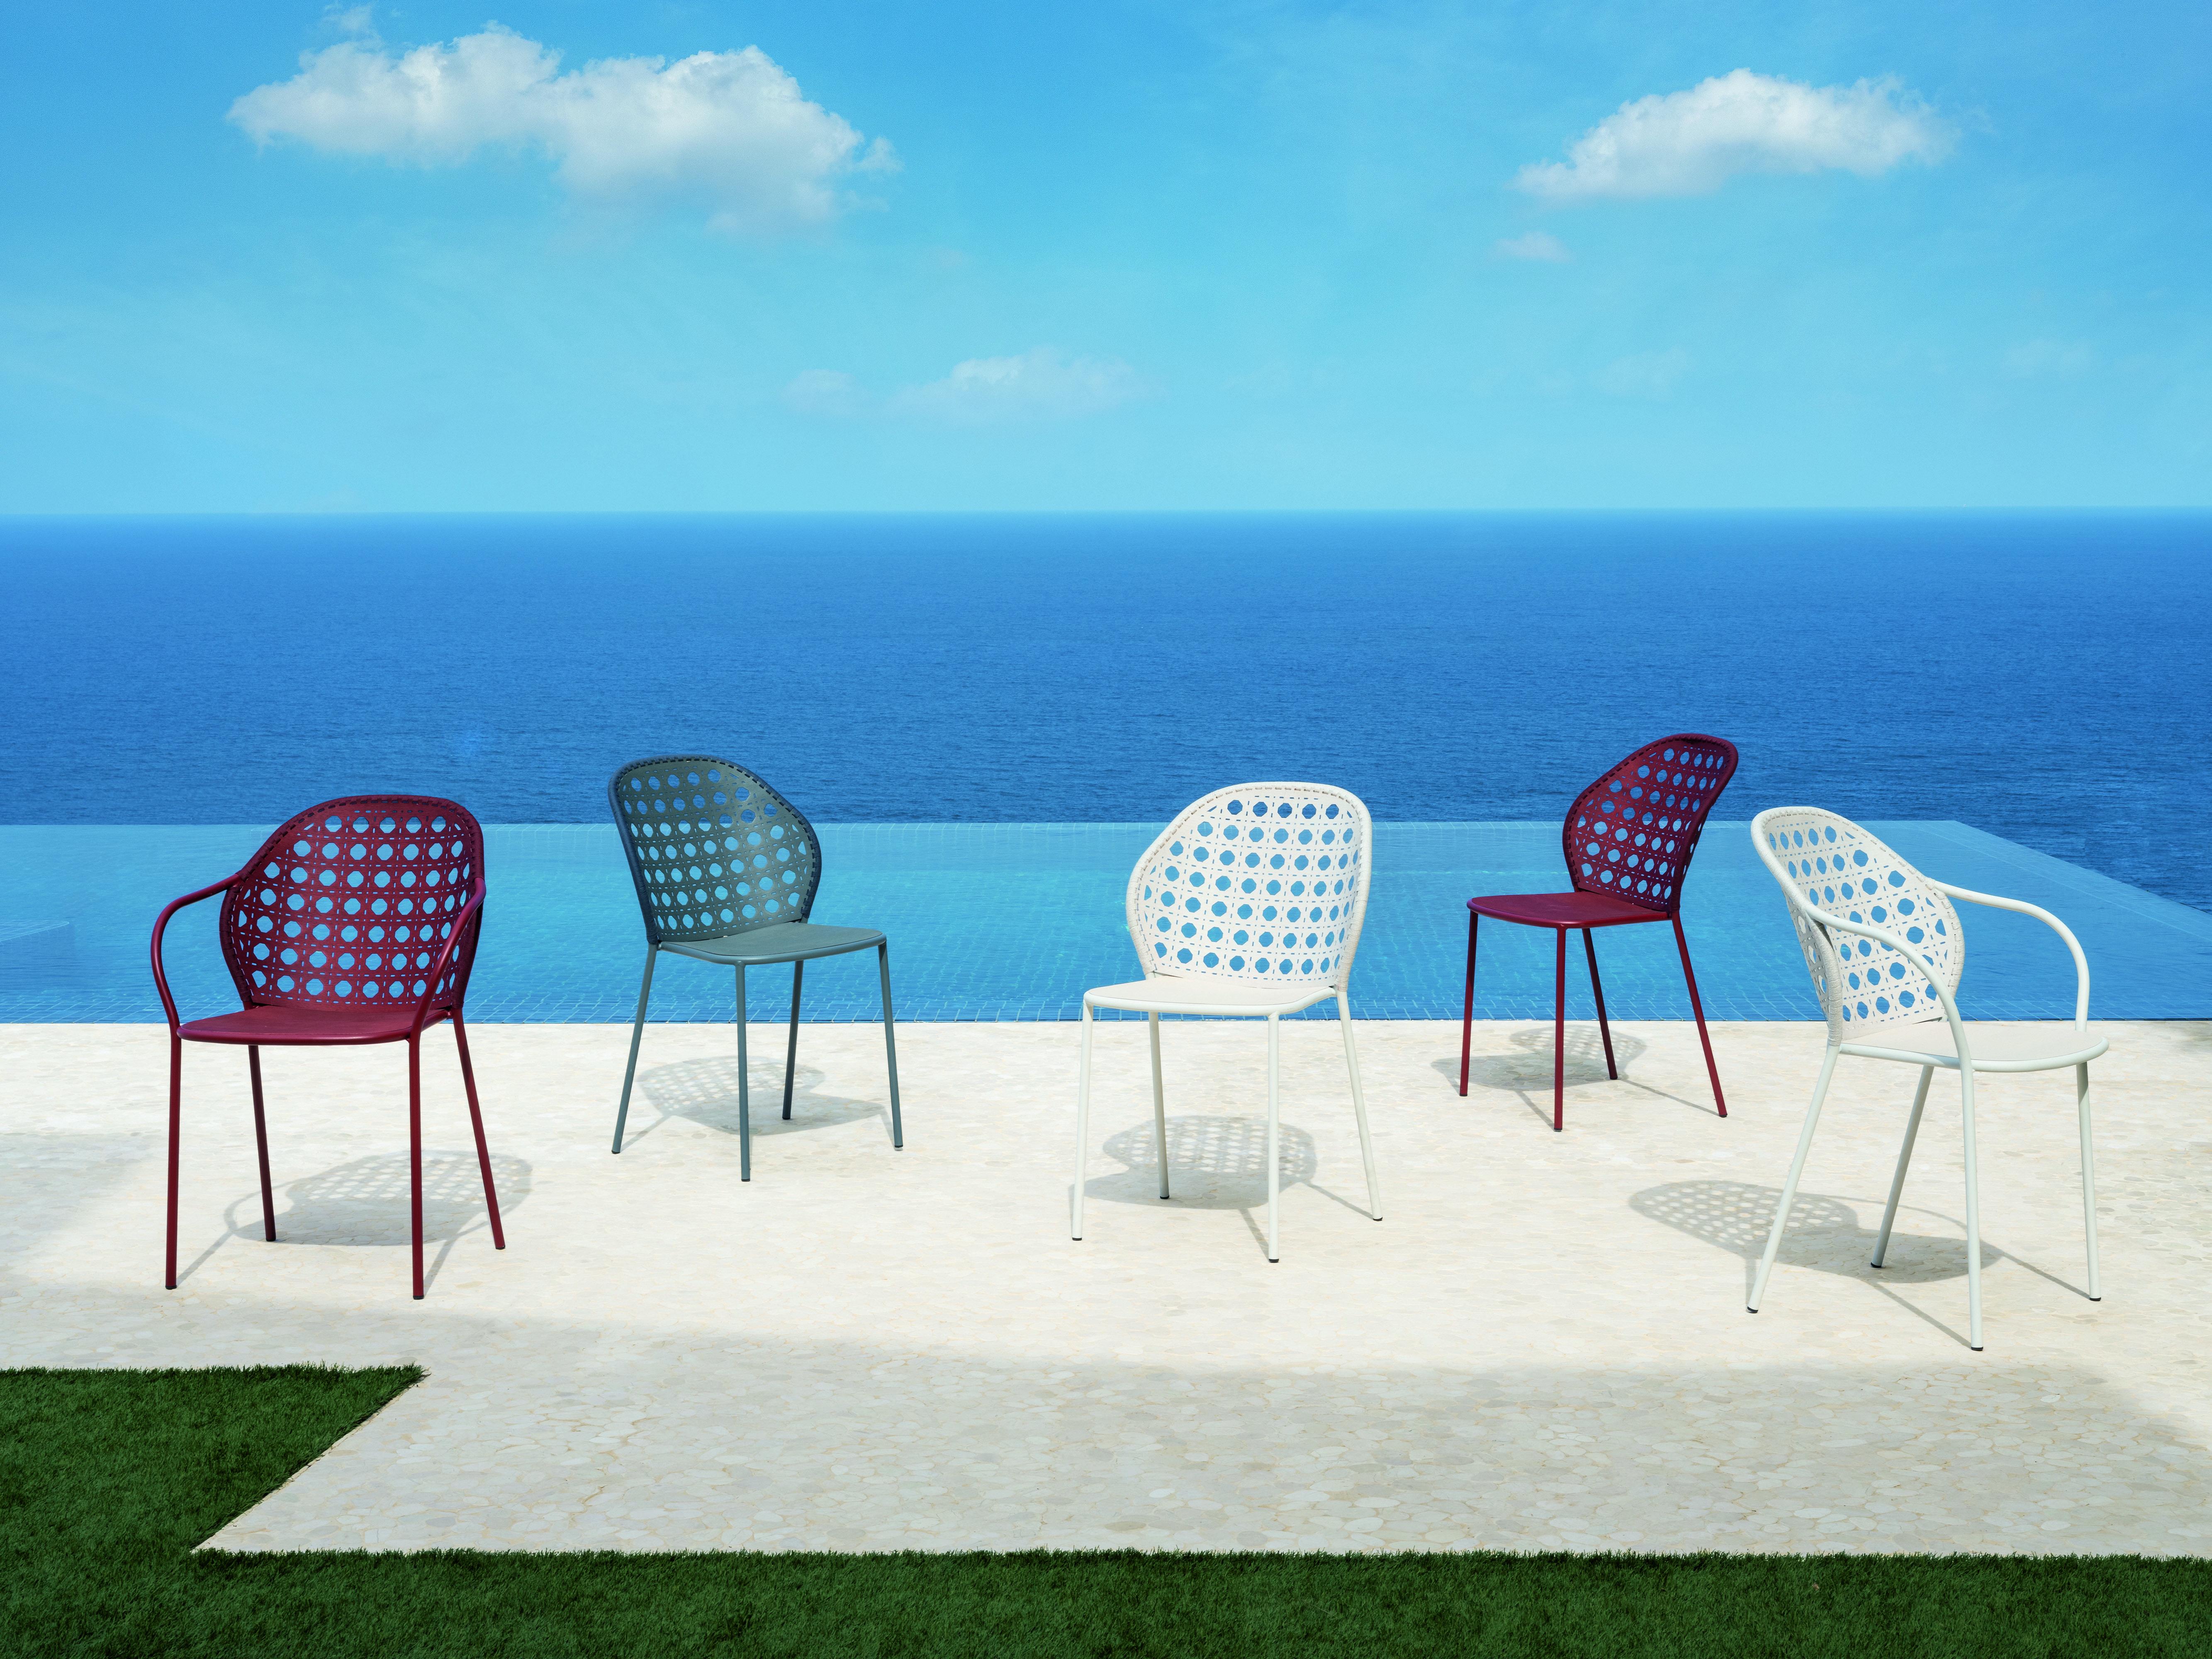 The freedom of composing the space around an outdoor table inspires the offer for outdoor seating Brise. The collection of chairs is made of stainless steel tubes with seating and backrest in Wood Evolution. It is precisely the workmanship of the